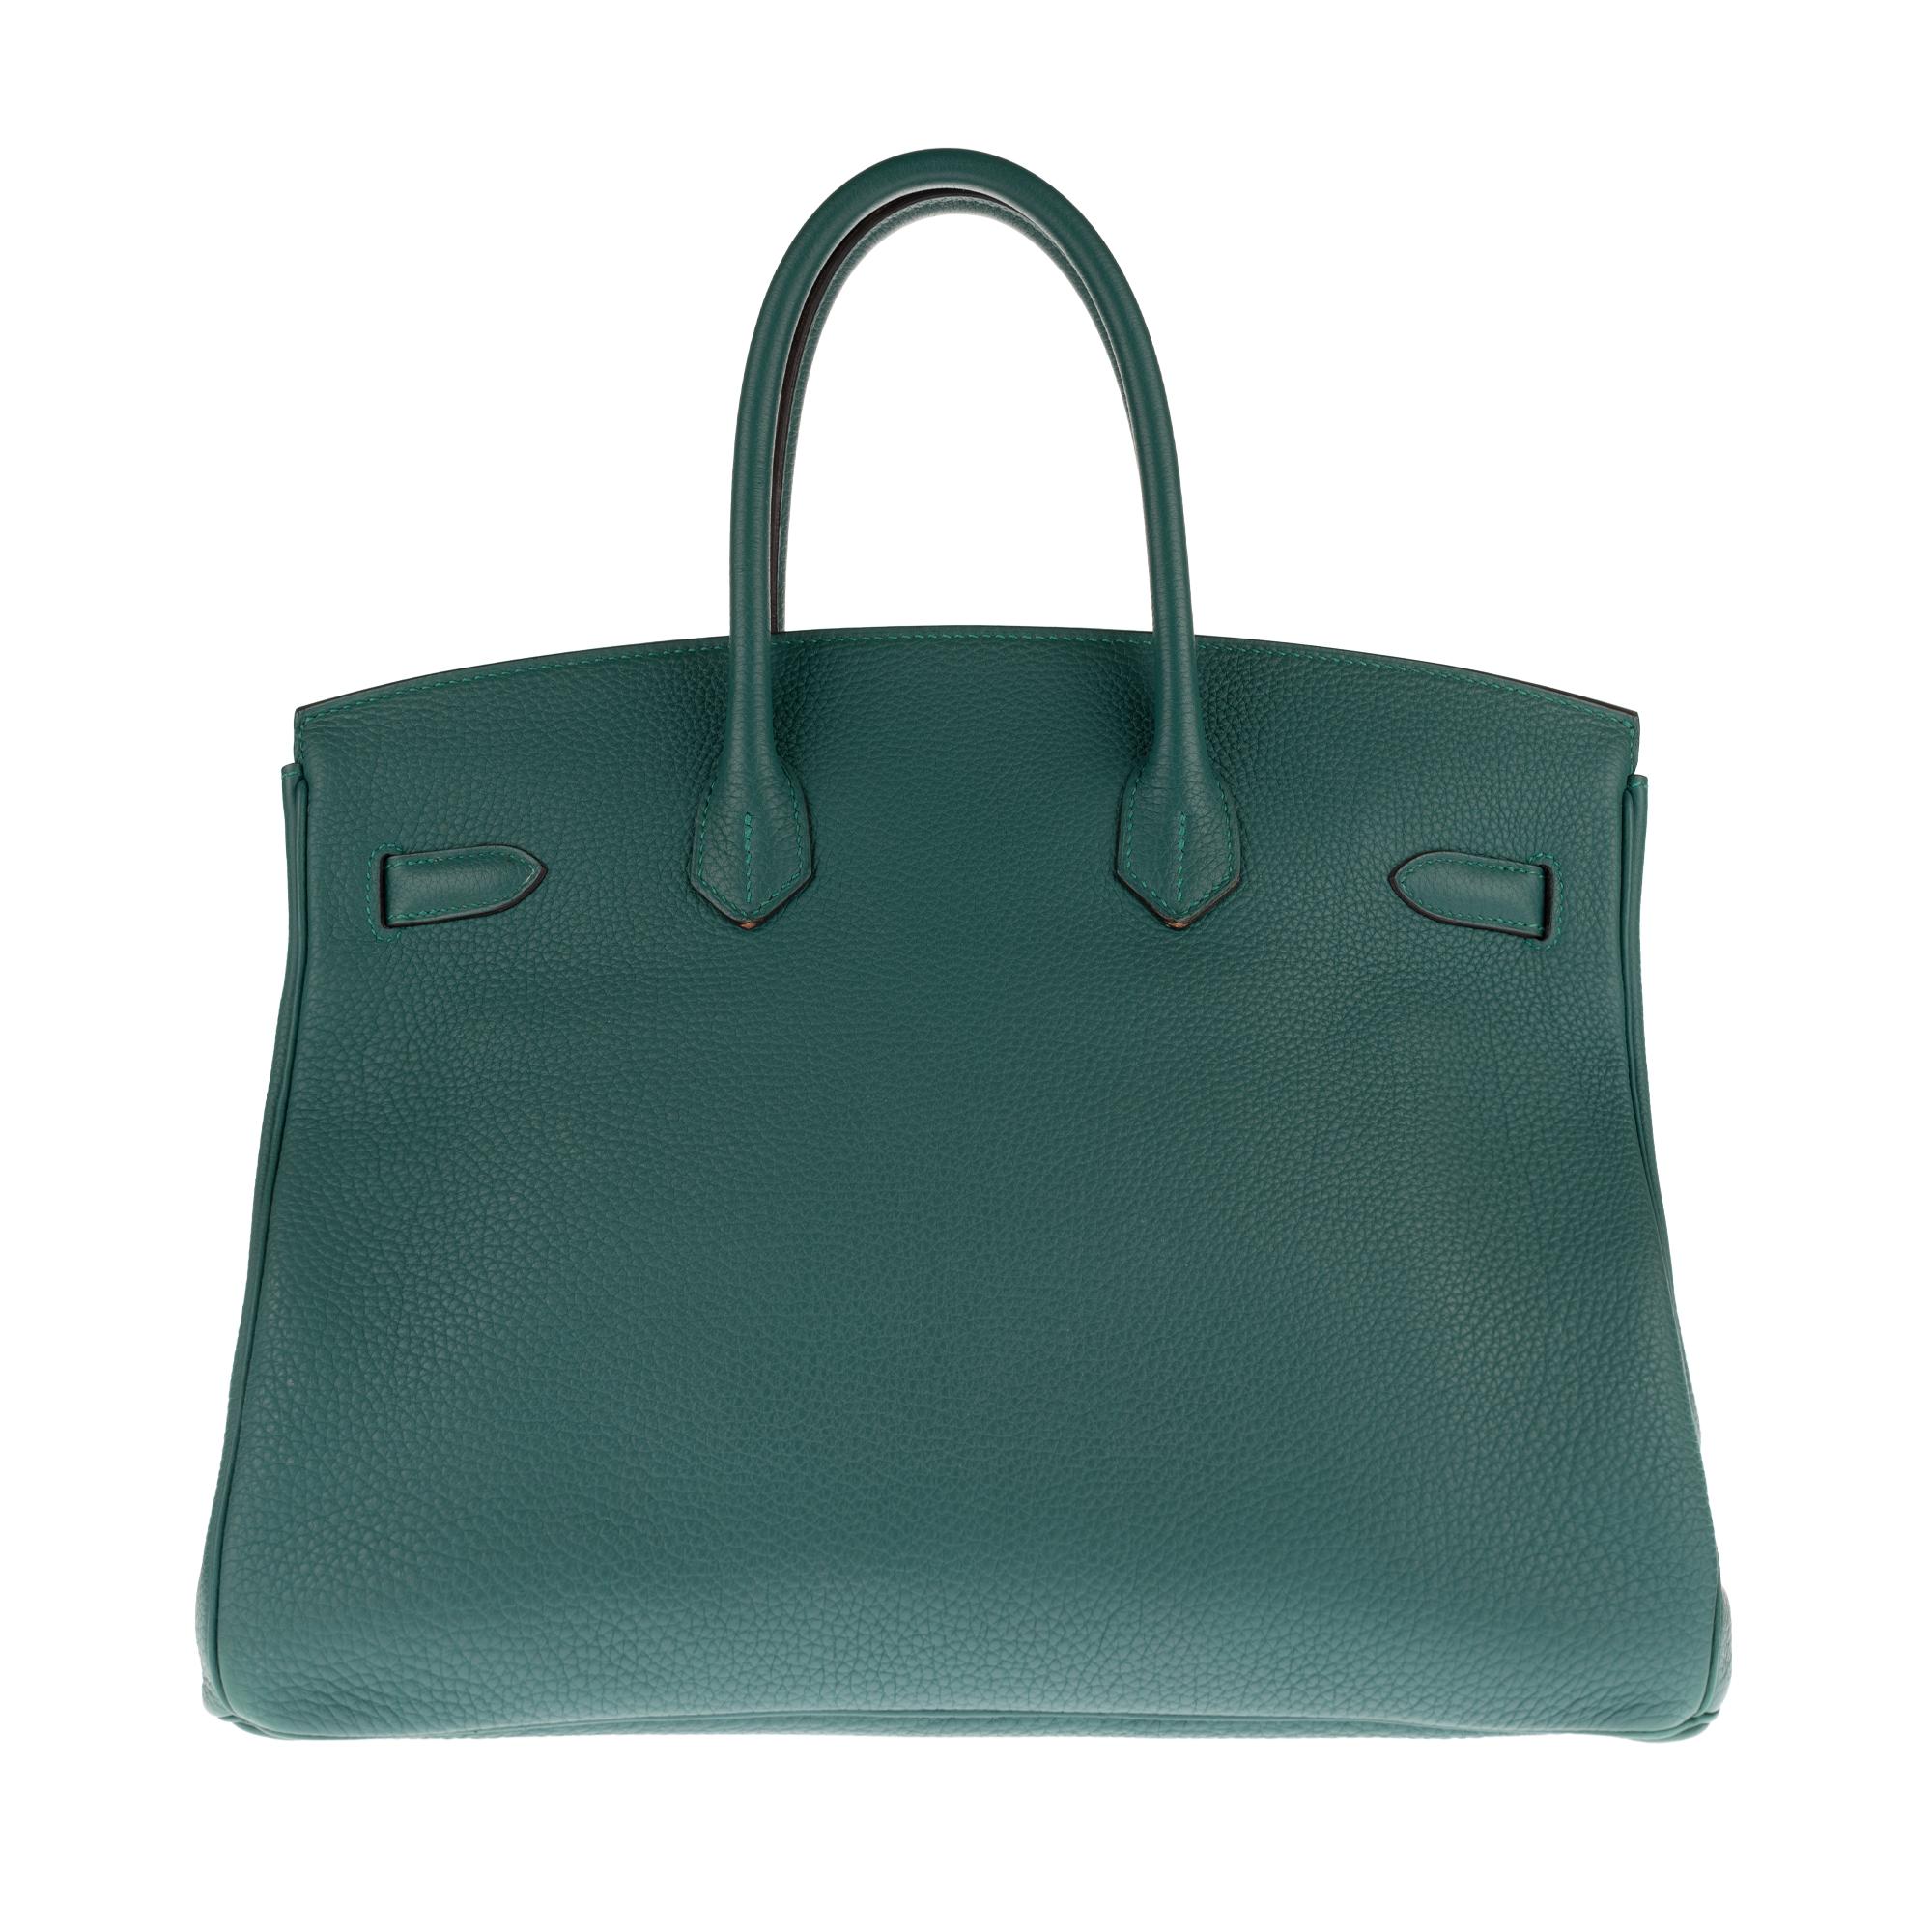 Stunning handbag Hermes Birkin 35 cm Togo leather color green Malachite , Palladium harware, double handle in green leather allowing a handheld.

Closure by flap.
Green leather inner lining, zippered pocket, plated pocket.
Signature: 